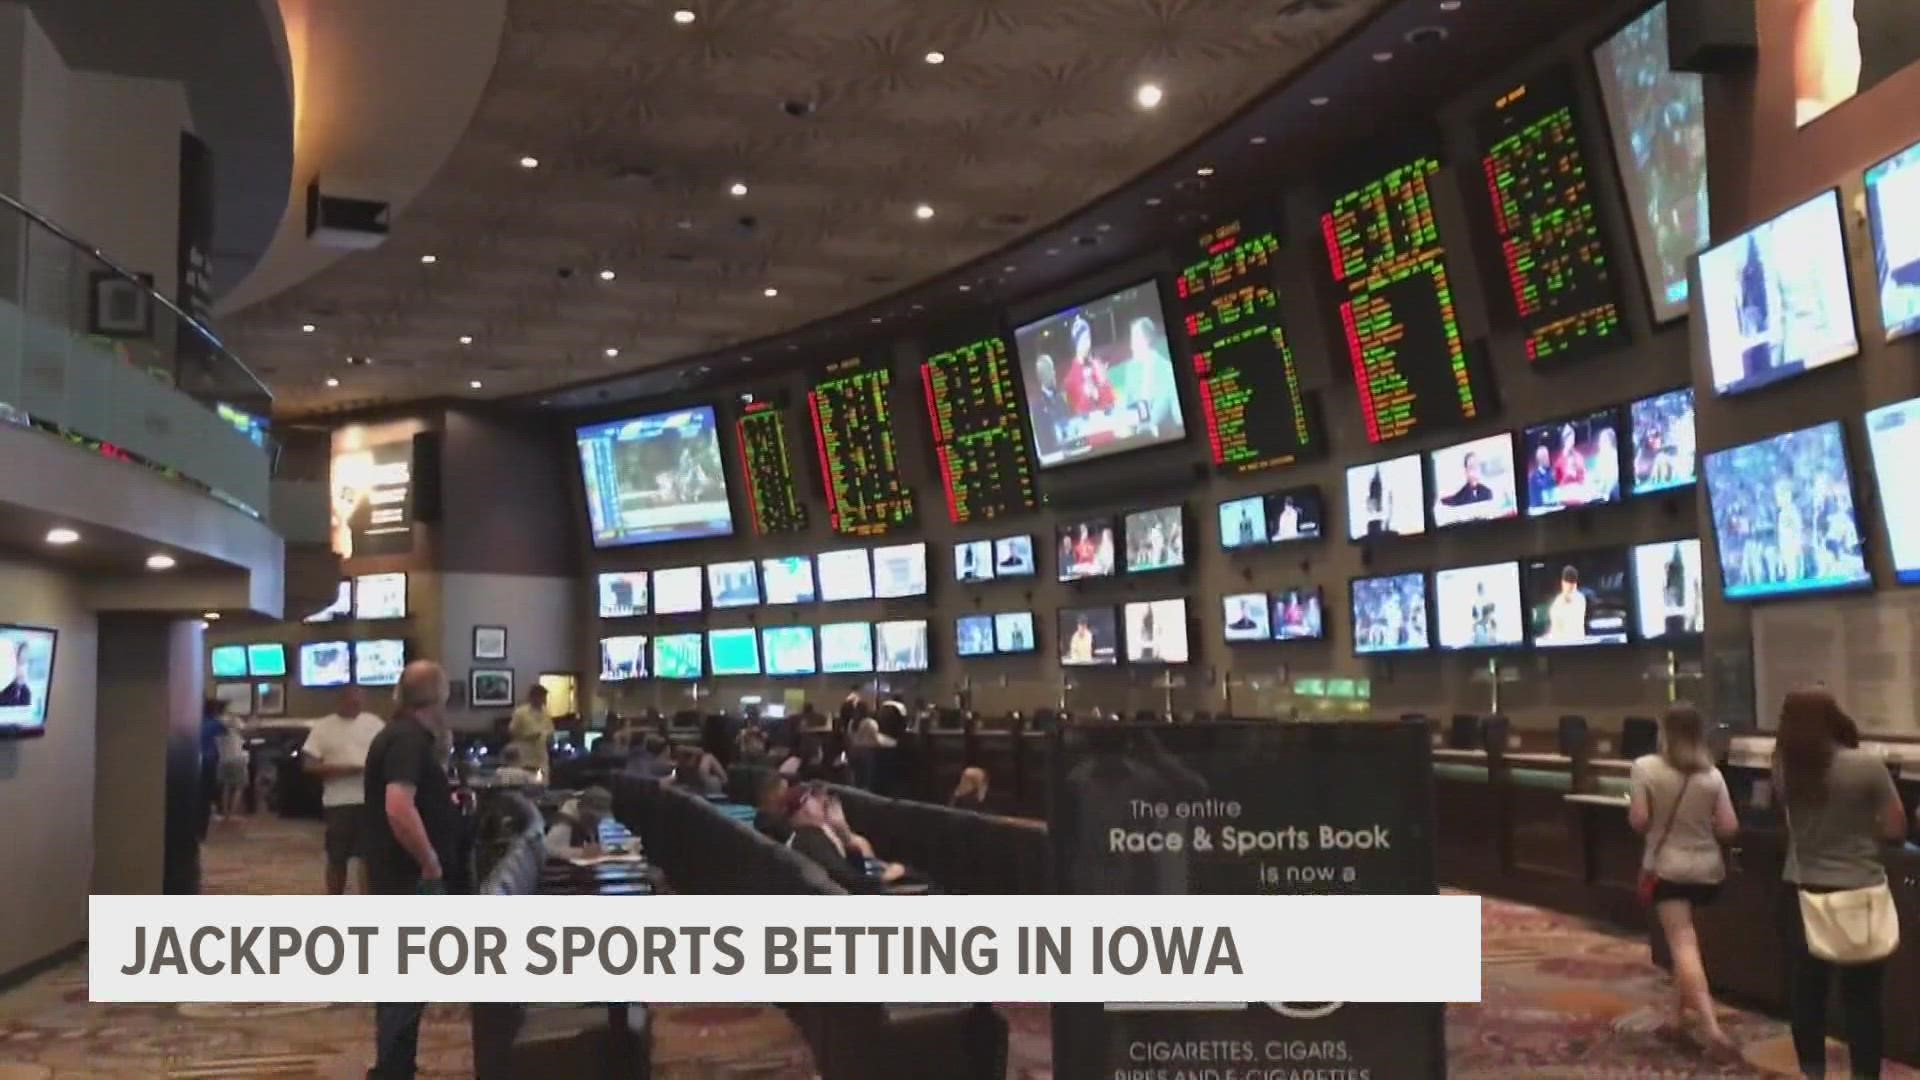 Iowans spent $1.2 billion on sports gambling from July 2020 to June 2021 and $1.5 billion between July 2021 to January 2022.